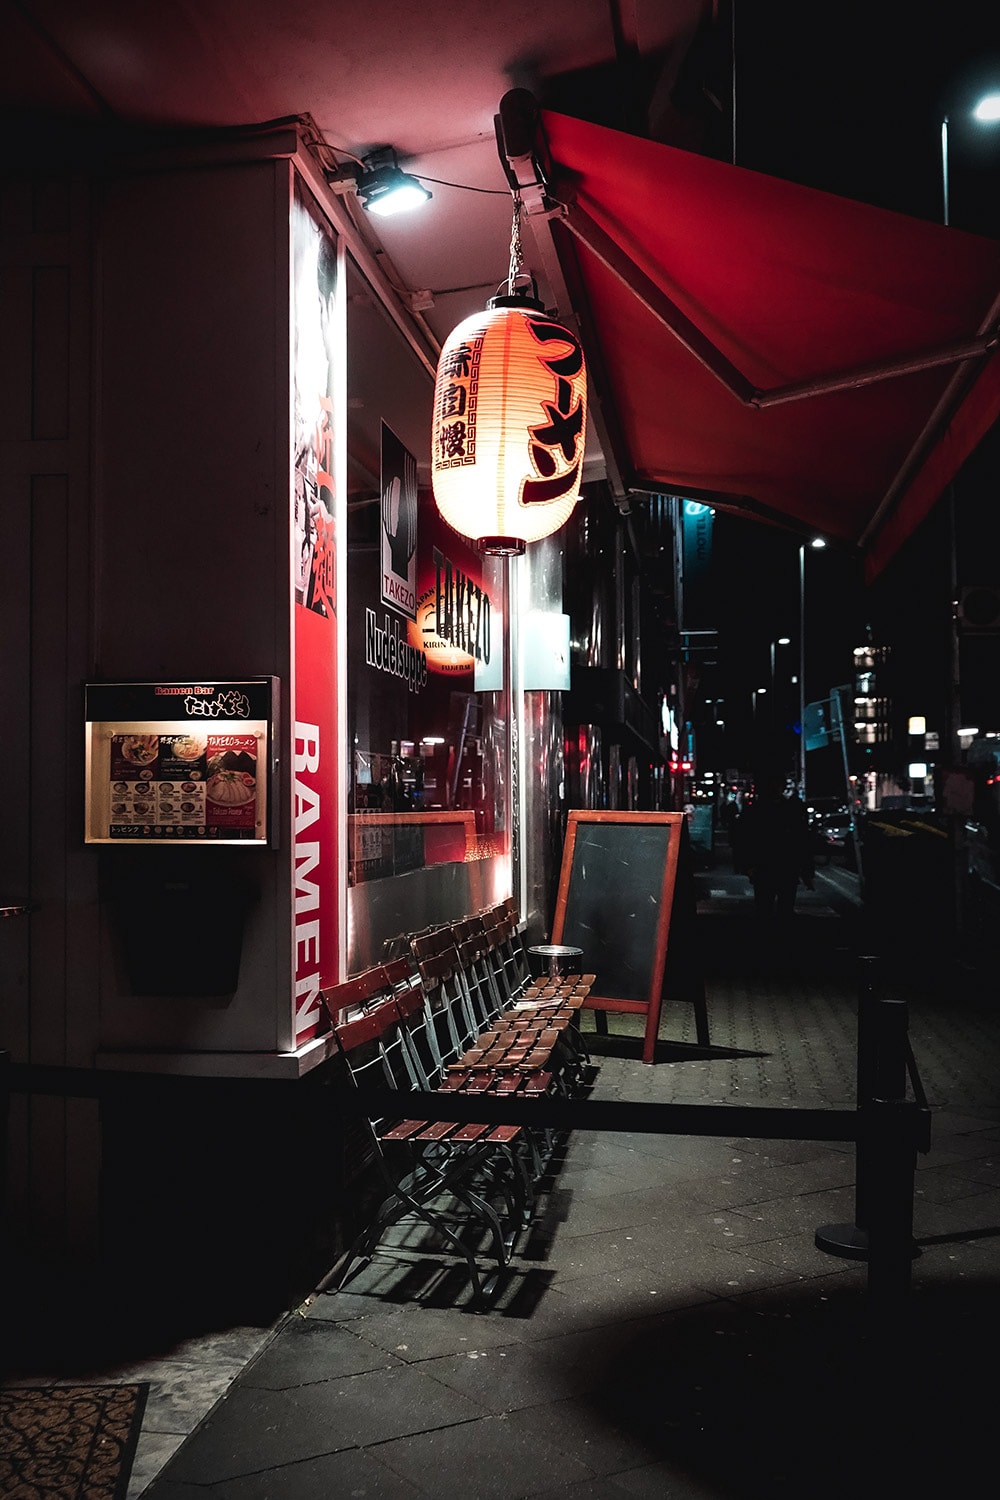 The city never sleeps. Whatever you're craving, you're bound to find it– day and nights. The Asian community influences a lot of the restaurants, so you can expect some outstanding Asian food.